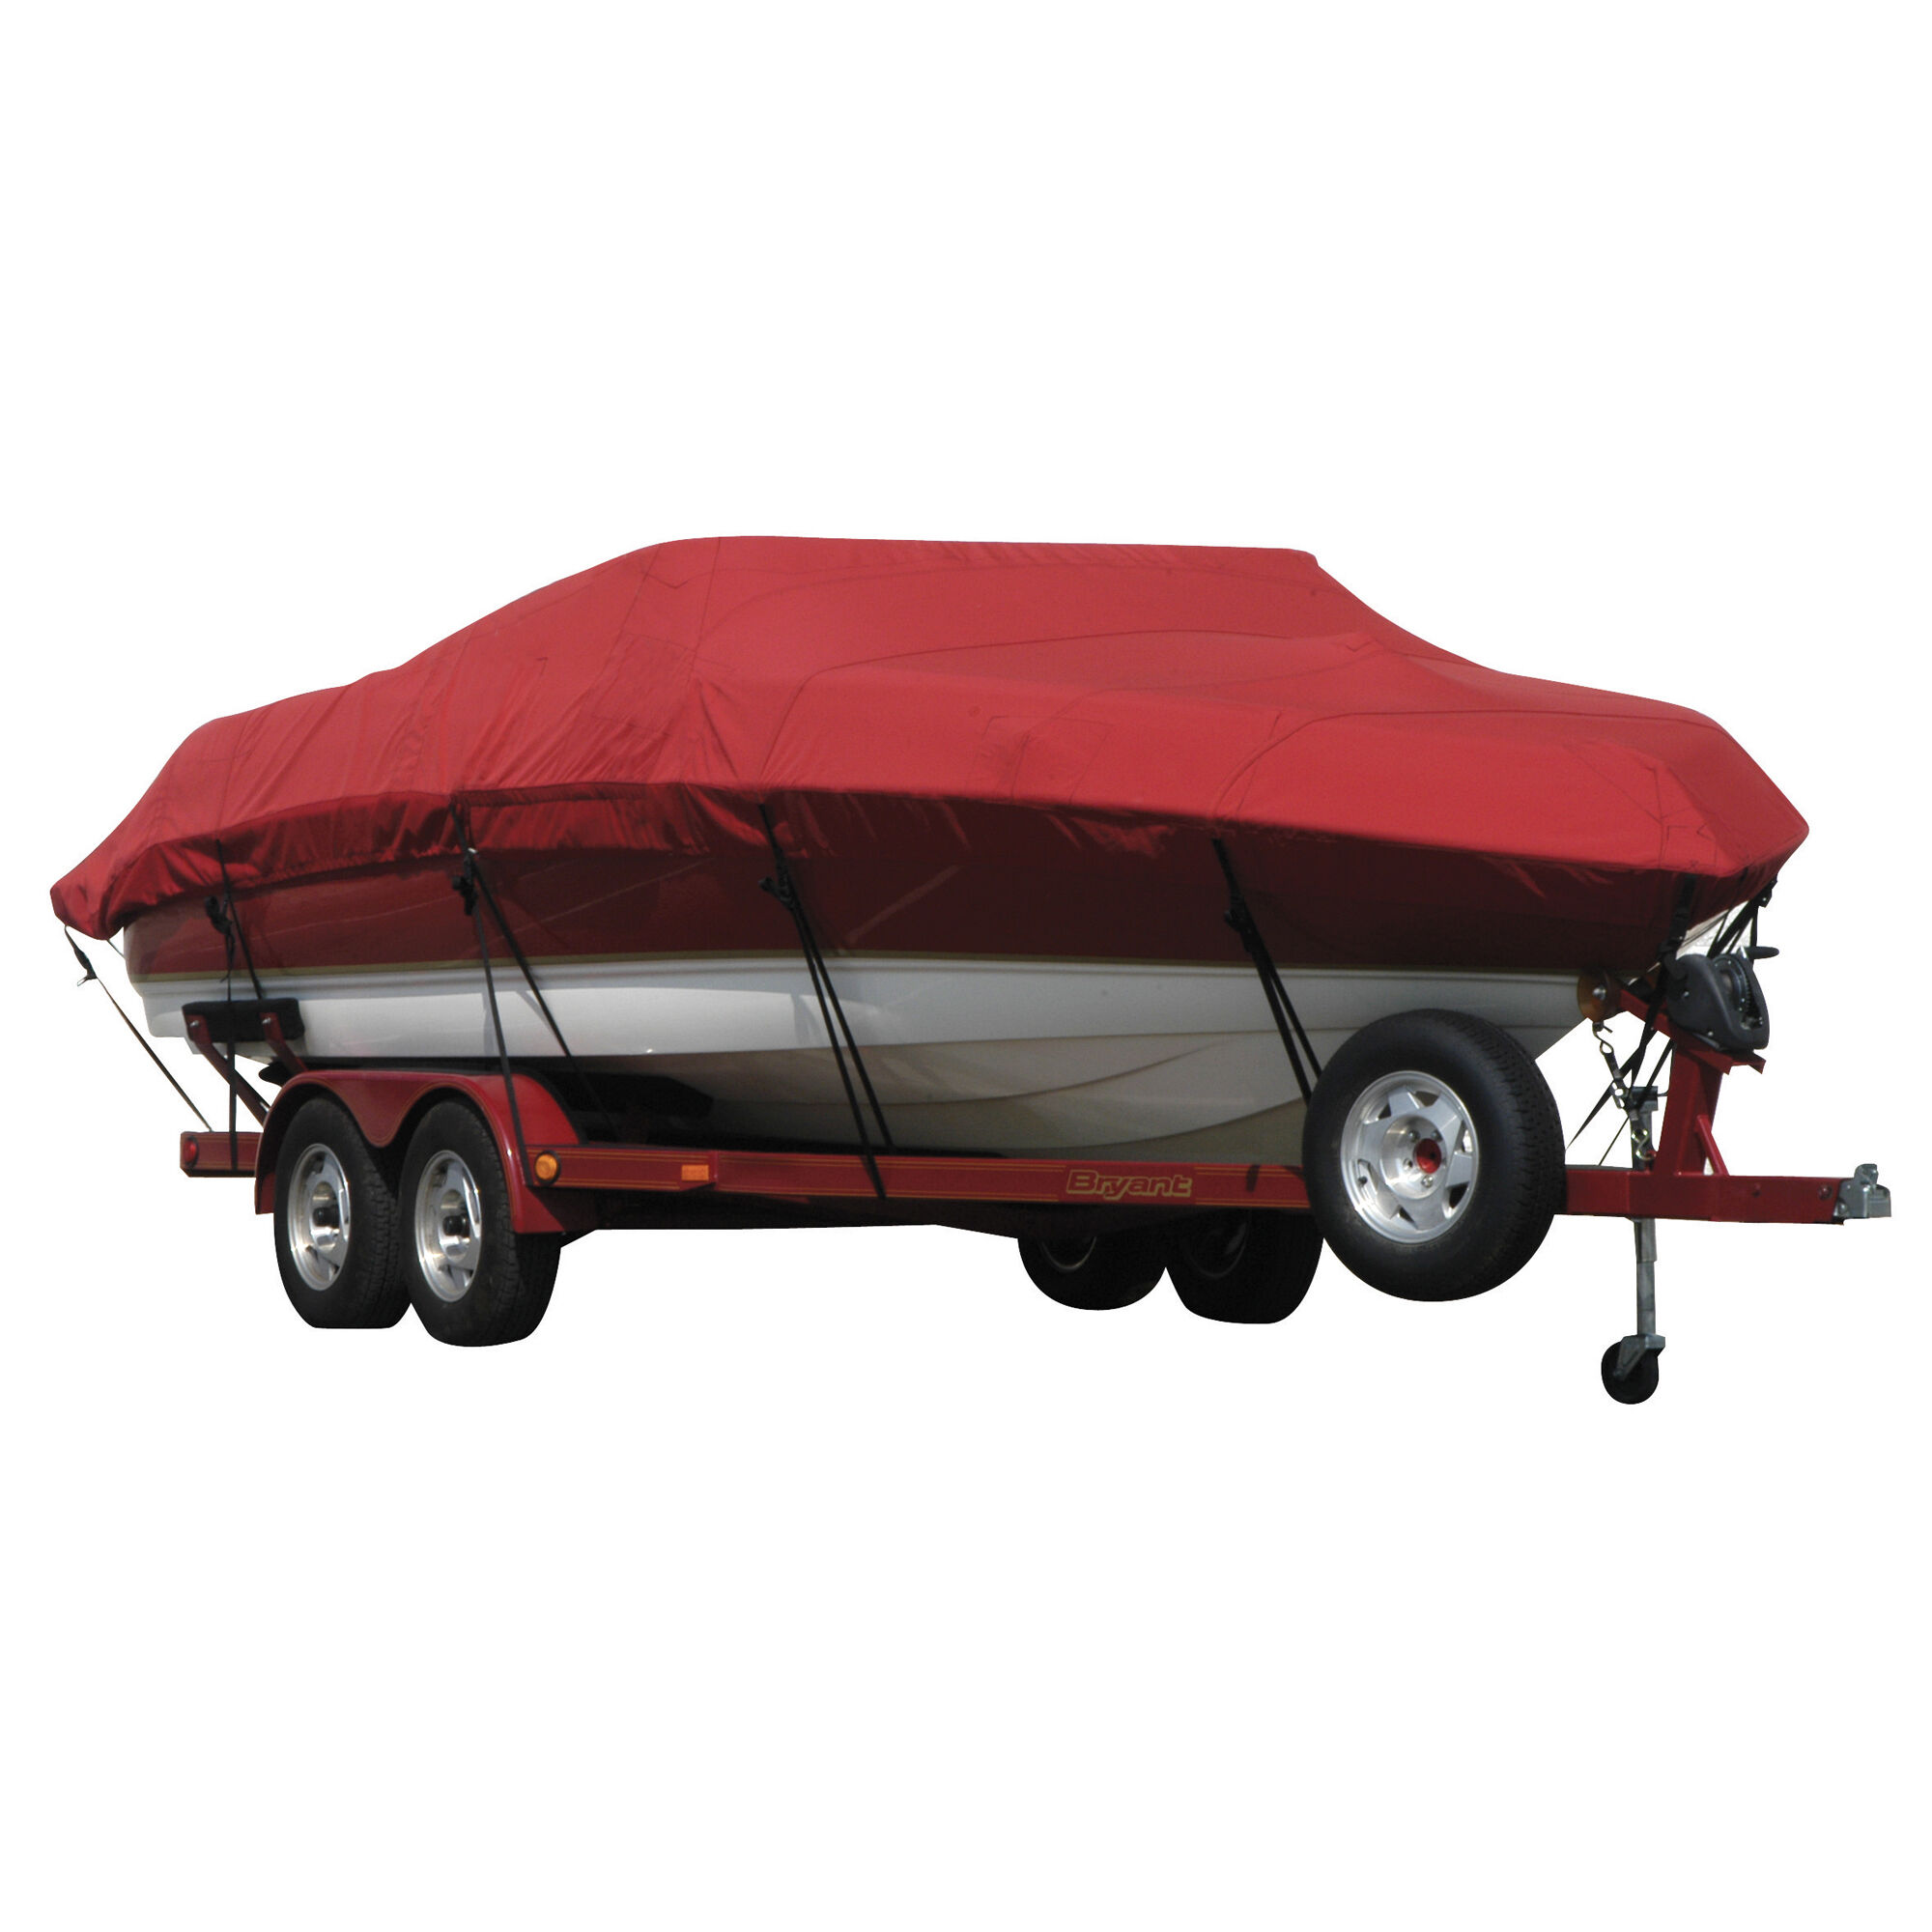 Covermate Exact Fit Sunbrella Boat Cover for Reinell/Beachcraft 191 Lse 191 Lse Br Low Profile w/ Plexi Windshield I/O. Red